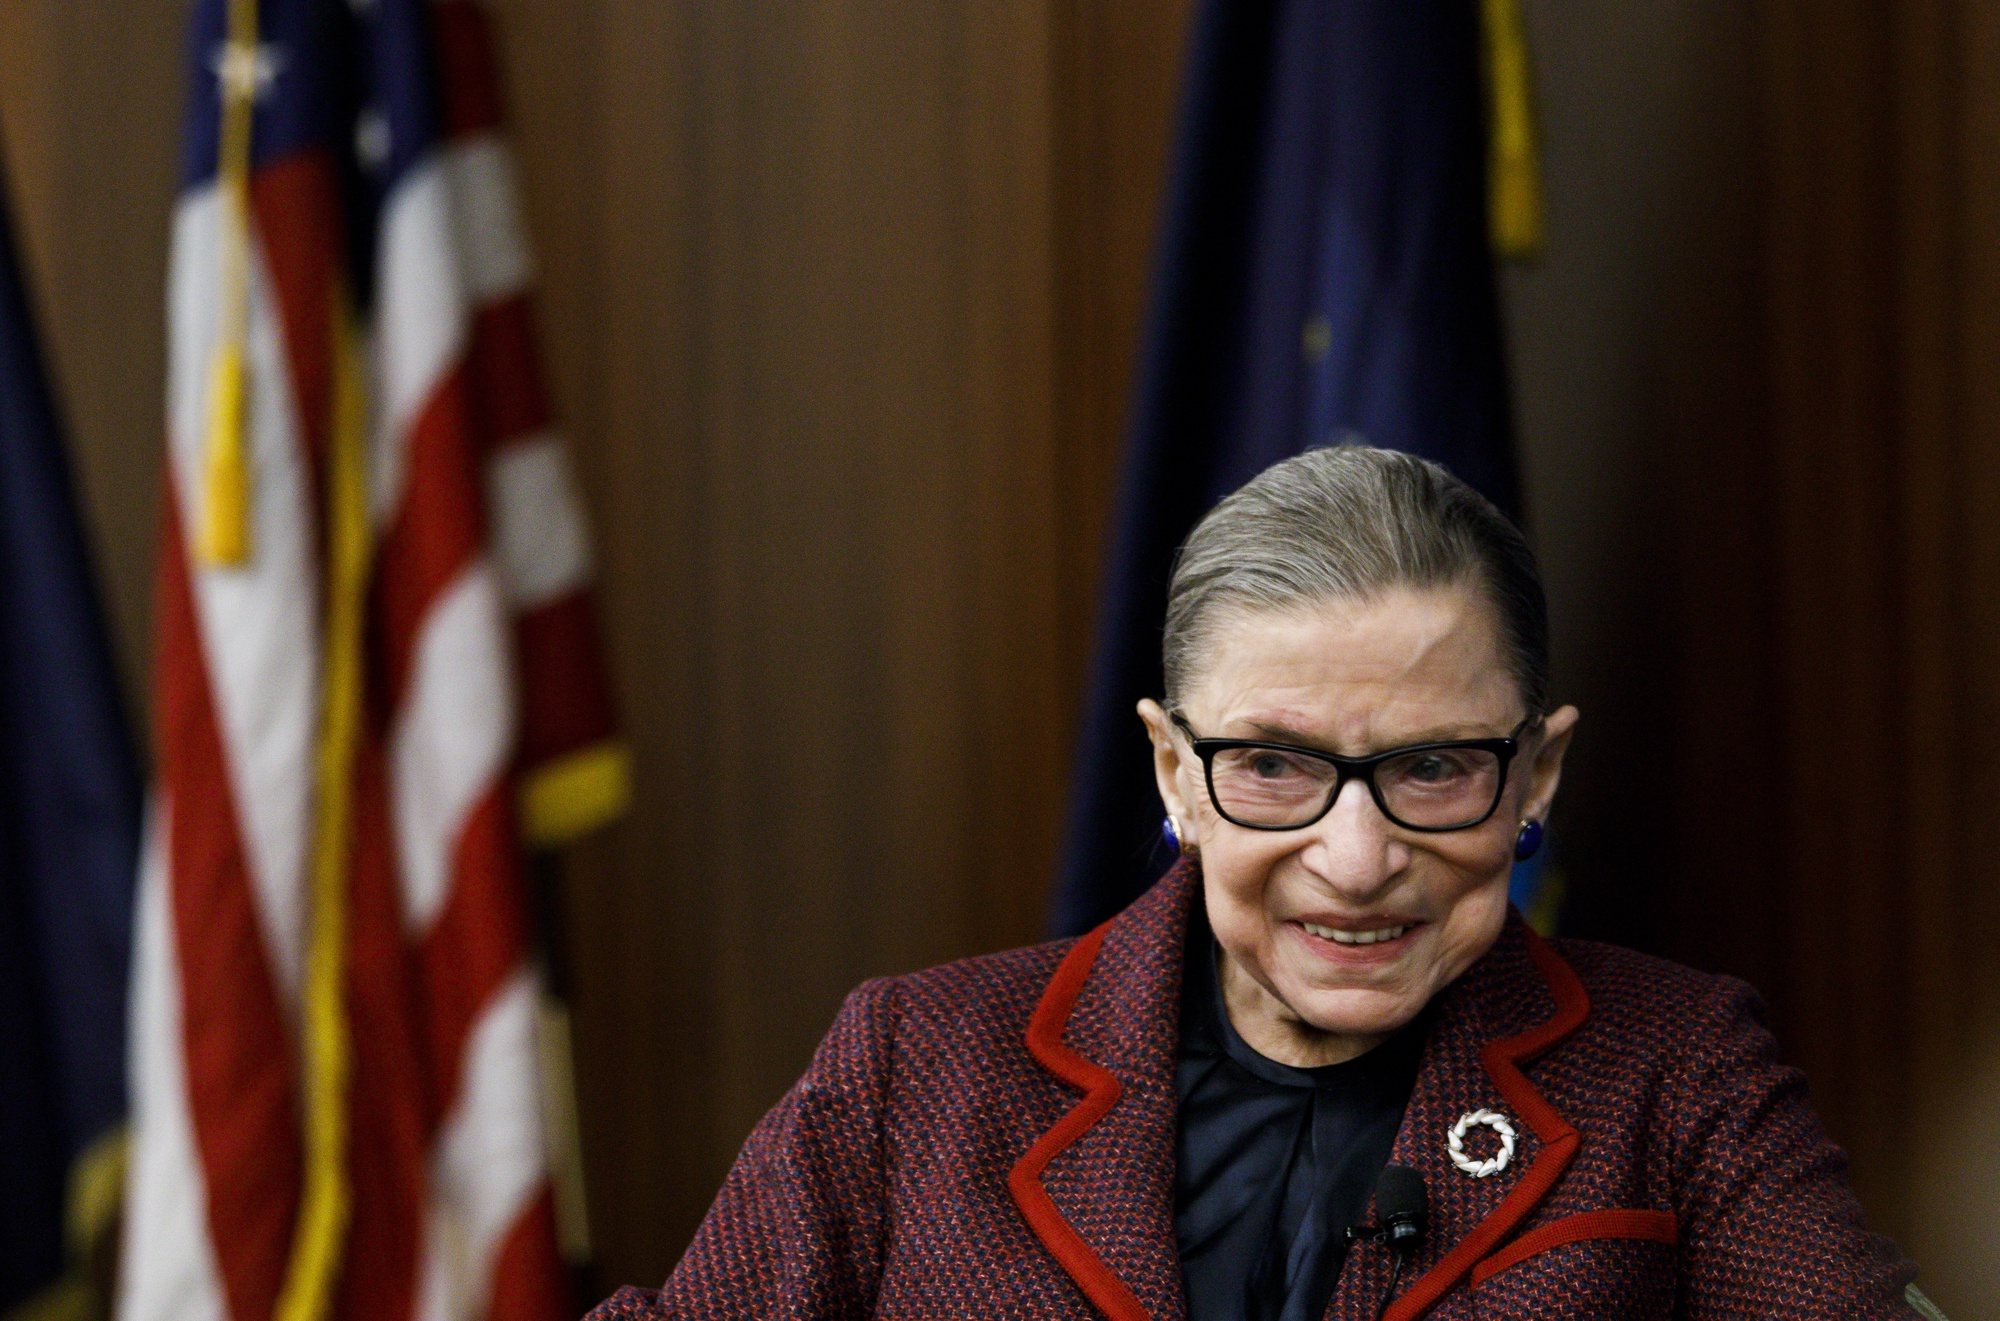 epa08679843 (FILE) - United States Supreme Court Justice Ruth Bader Ginsburg attends an event at New York Law School in New York, New York, USA, 06 February 2018. According to reports on 18 September 2020, United States Supreme Court Justice Ruth Bader Ginsburg has died at the age of 87. Justice Ginsburg, also known as RBG, took office on 10 August 1993 after an appointment by then US President Bill Clinton. She was the oldest of the nine serving supreme court judges at the time of her death.  EPA/JUSTIN LANE *** Local Caption *** 54091573